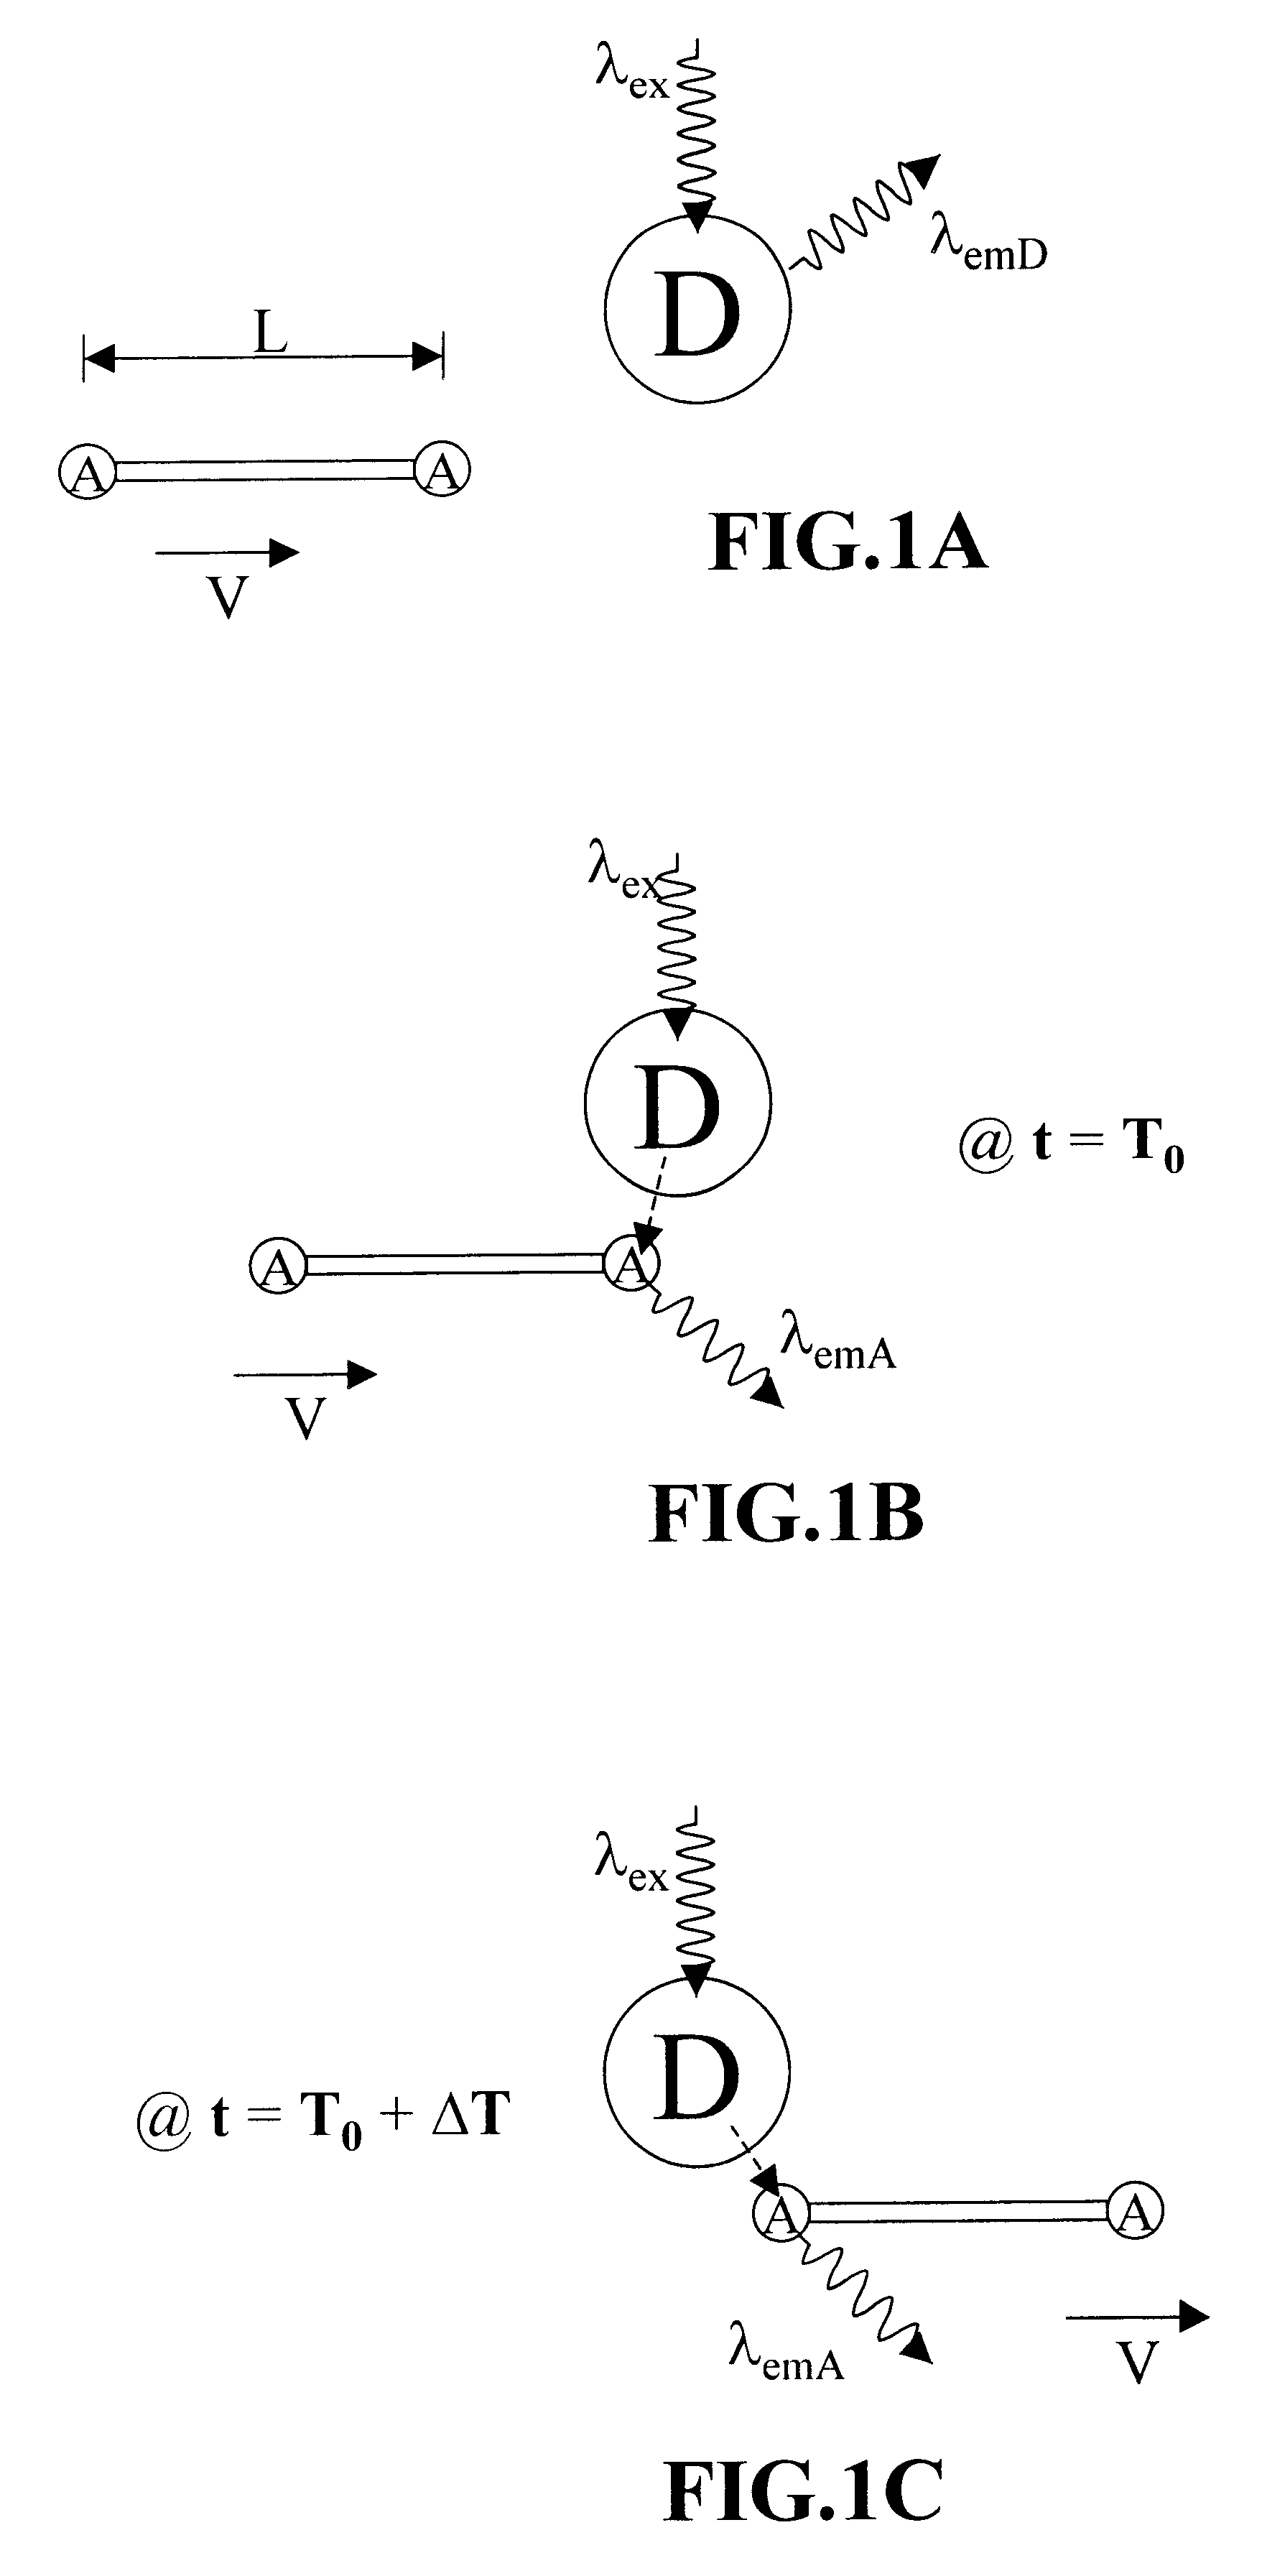 Methods of analyzing polymers using a spatial network of fluorophores and fluorescence resonance energy transfer